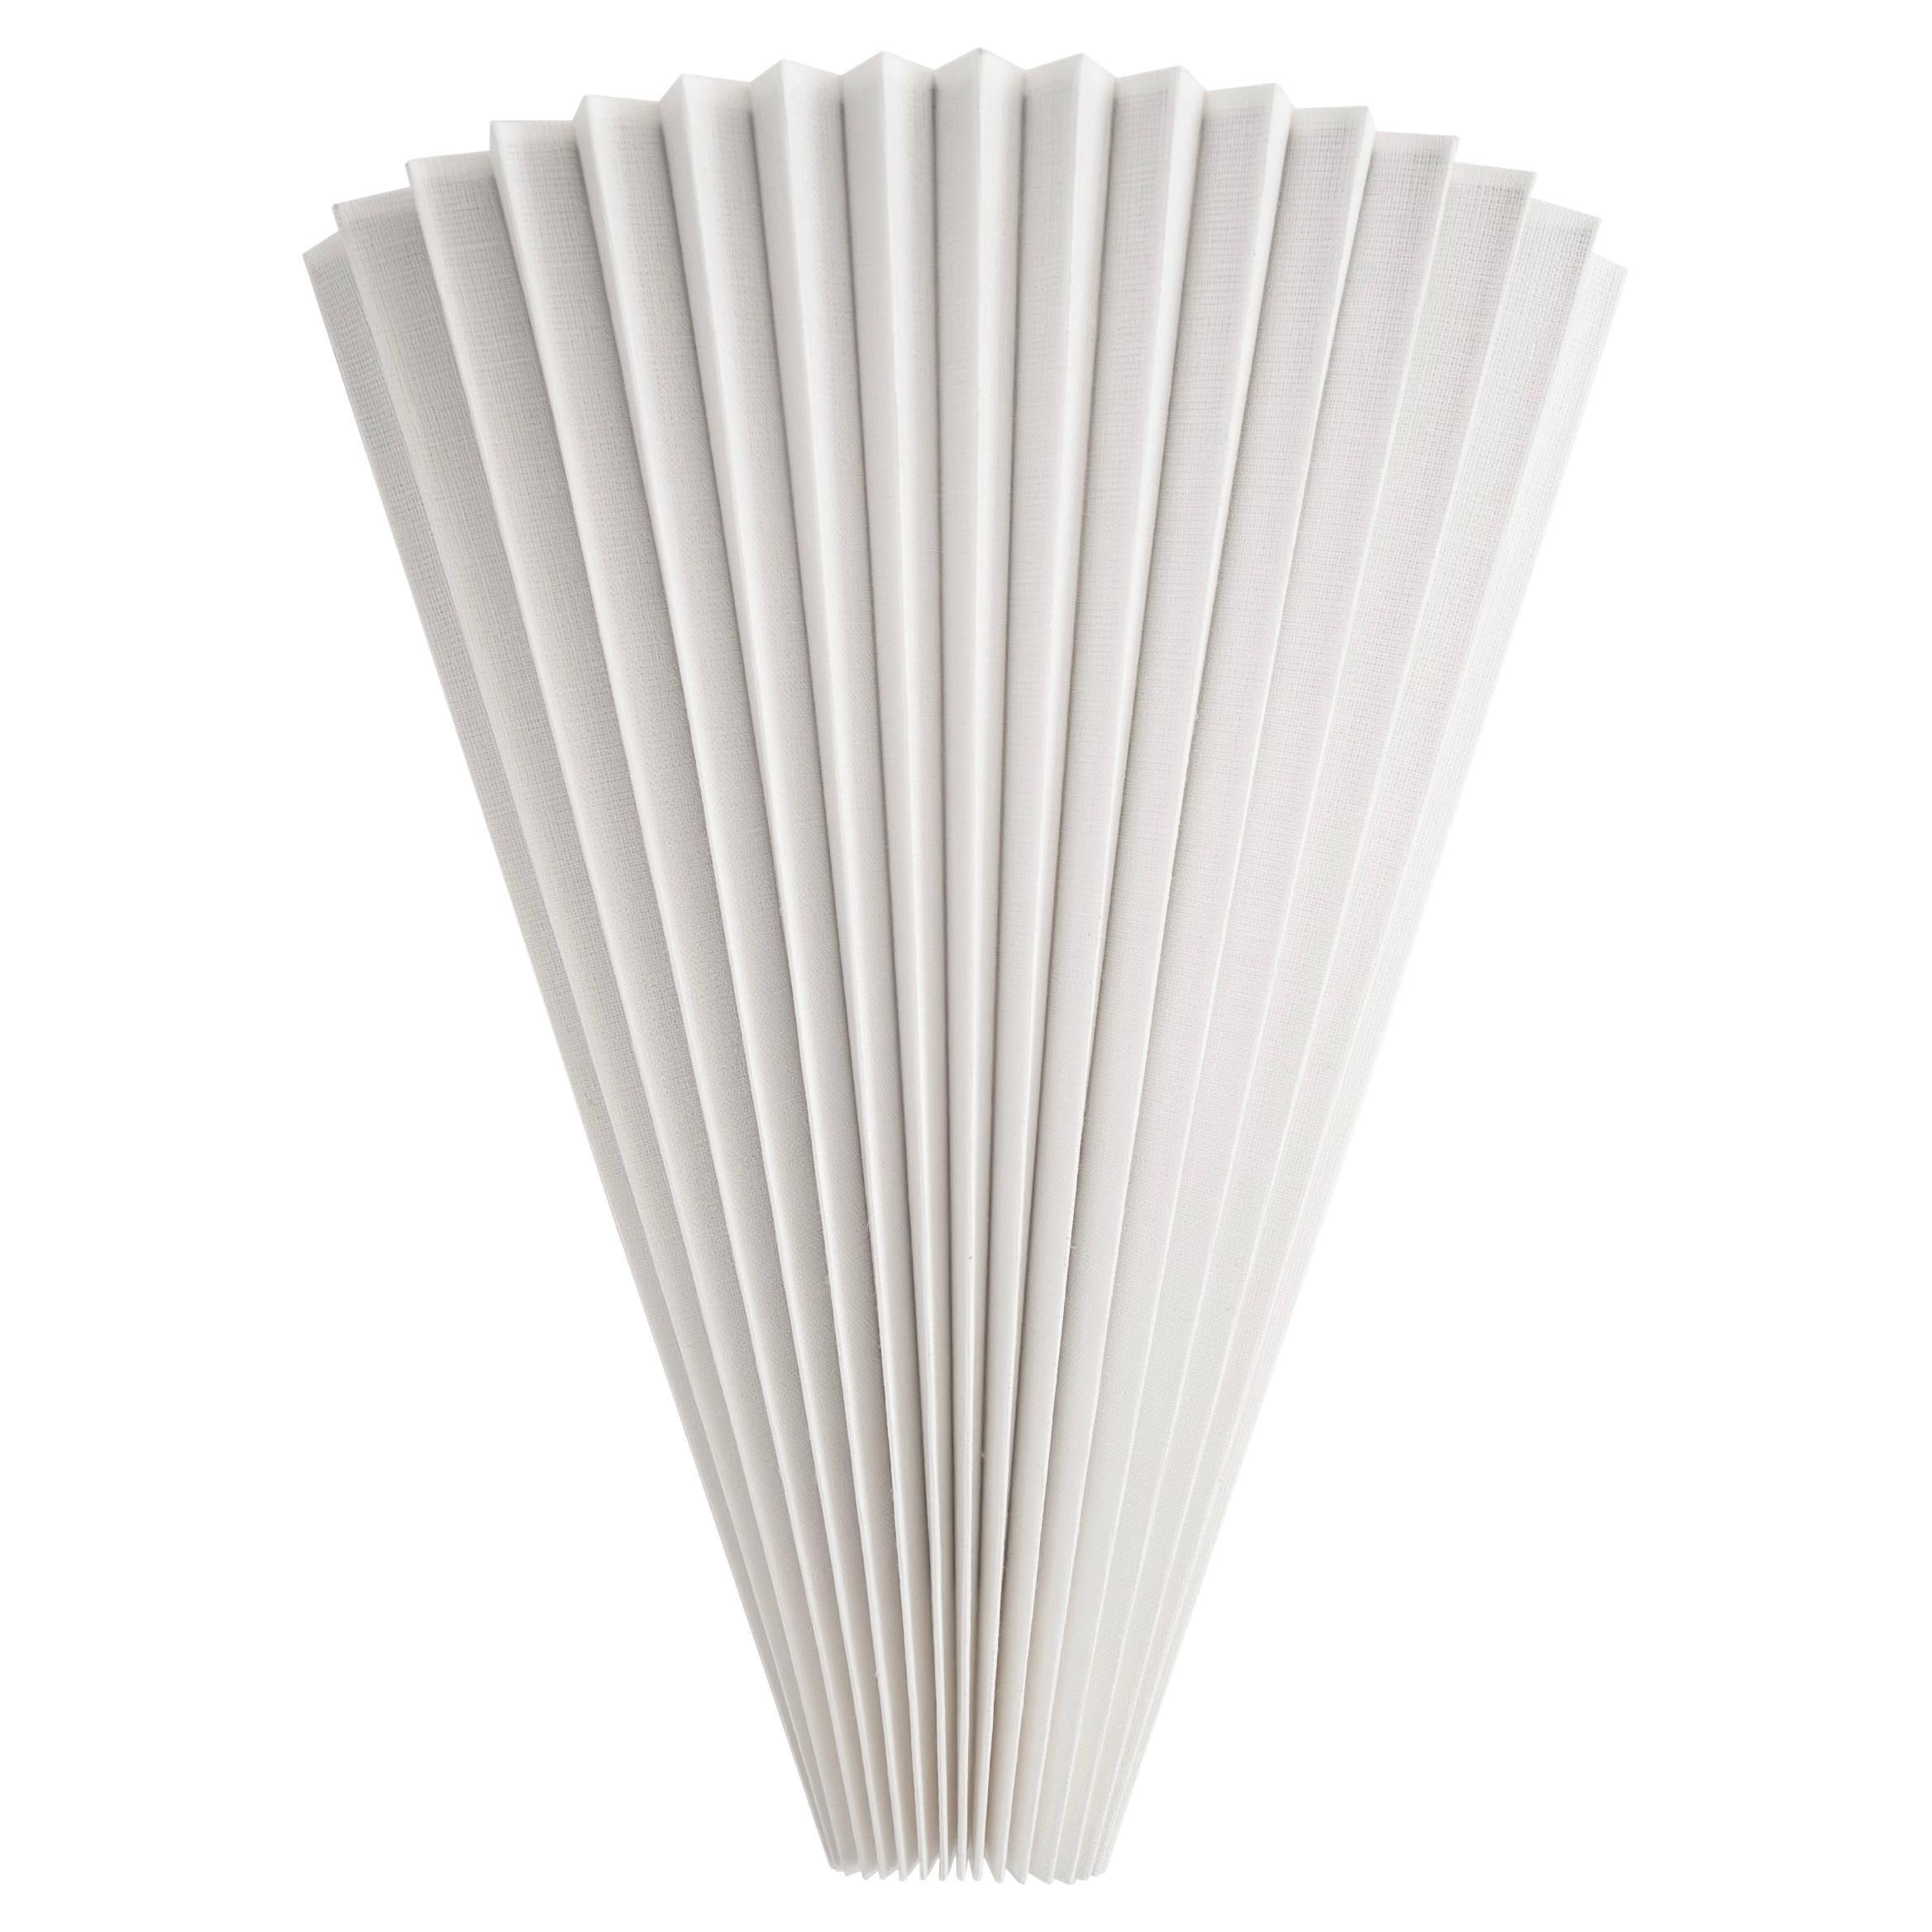 Contemporary Pleated Fan Light with Linen Shade off-white Handmade Set of 8no. For Sale